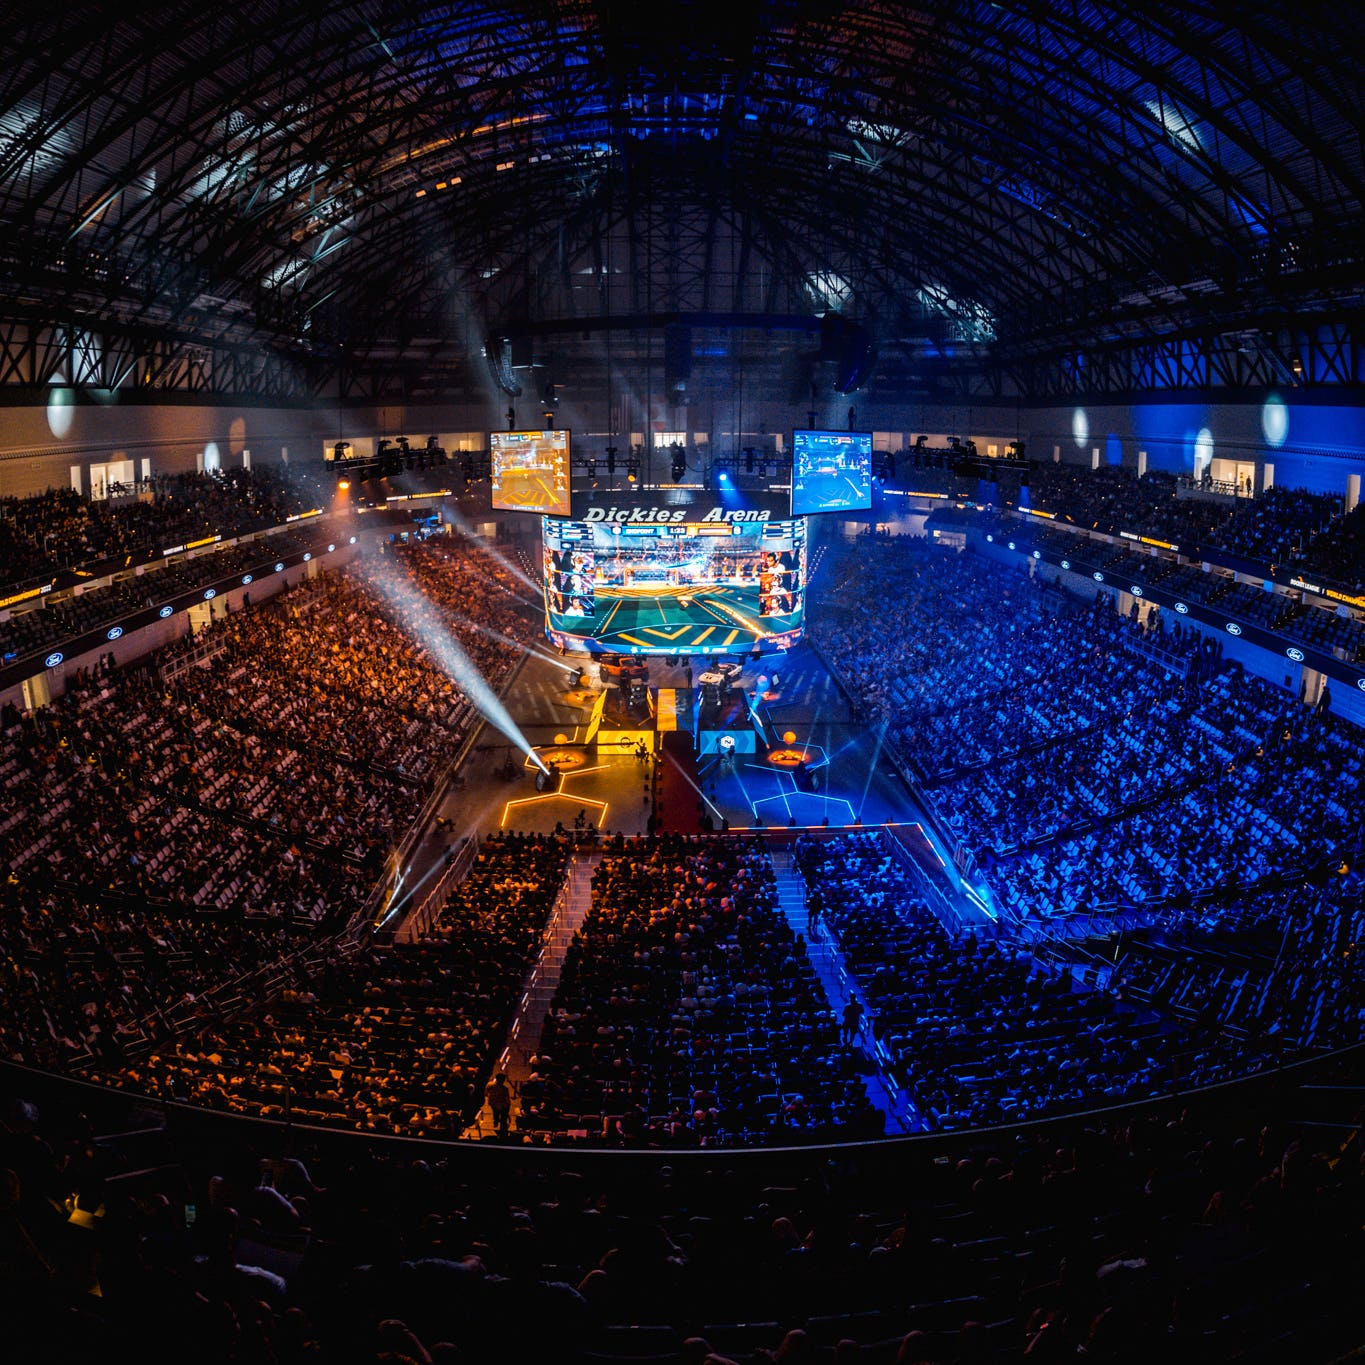 The Rocket League World Championship — Teams, Schedule, Streams - Esports  Illustrated